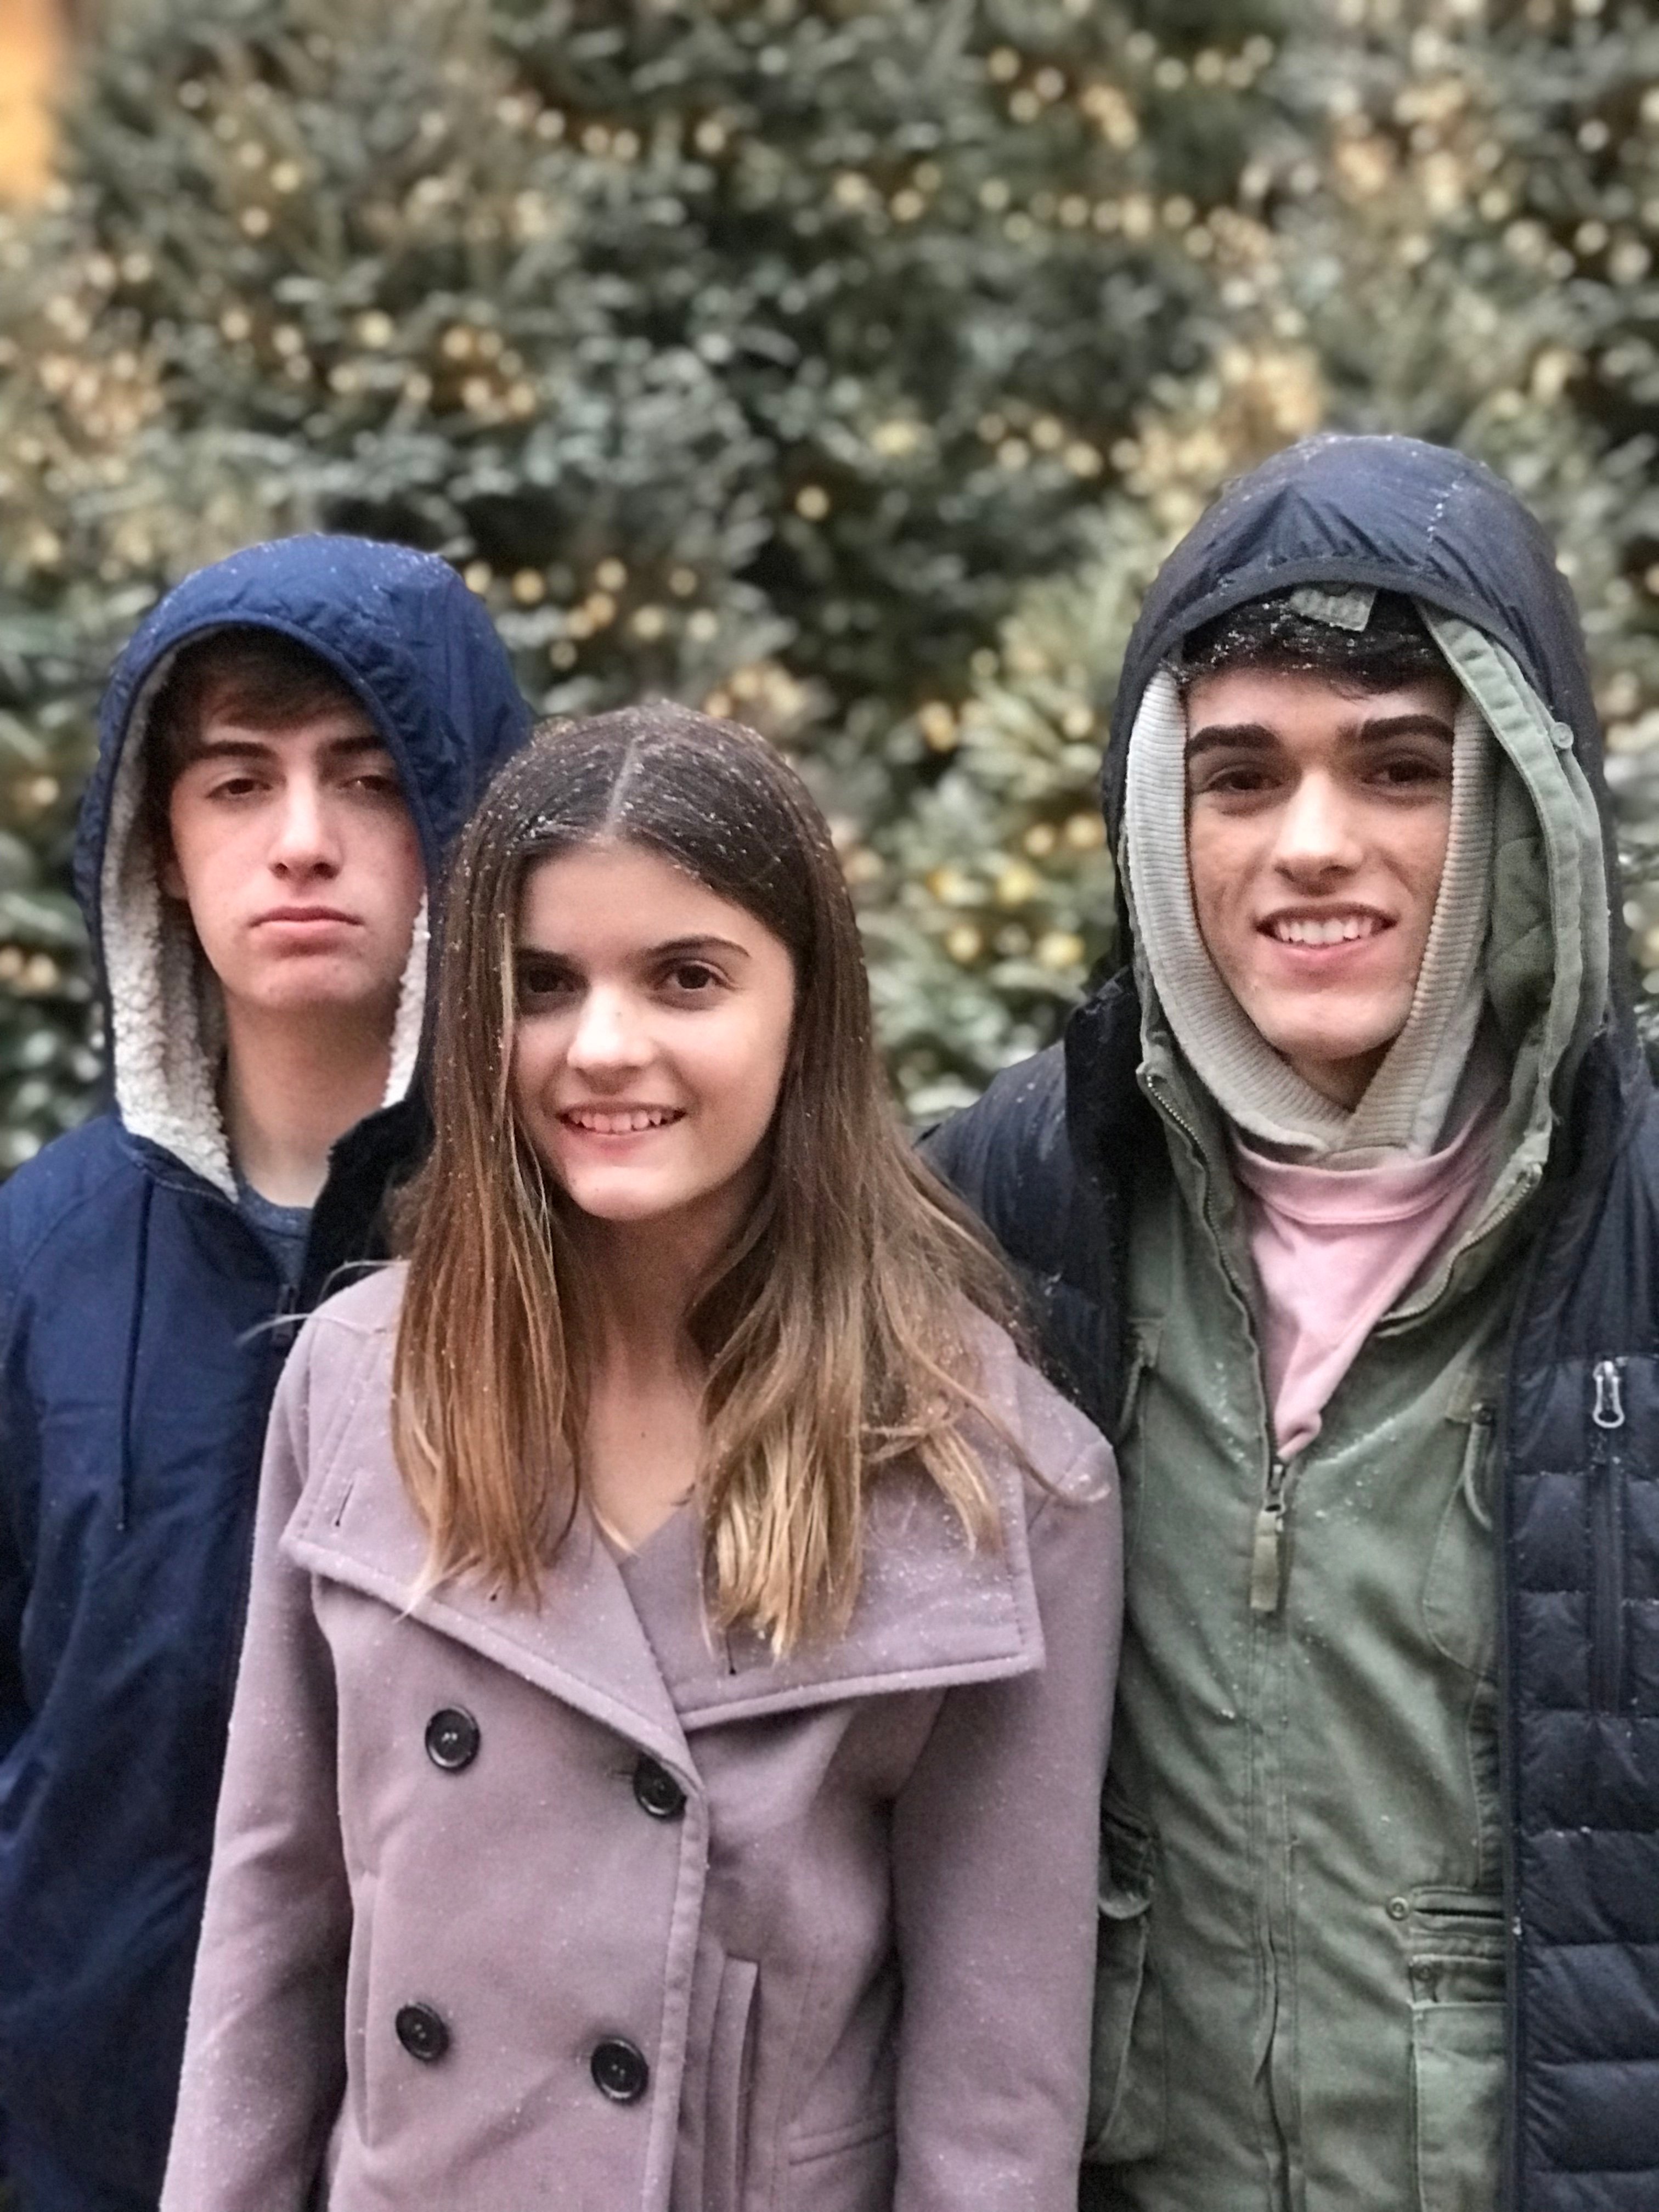 three teens posing for a picture in front of lit Christmas trees new york city